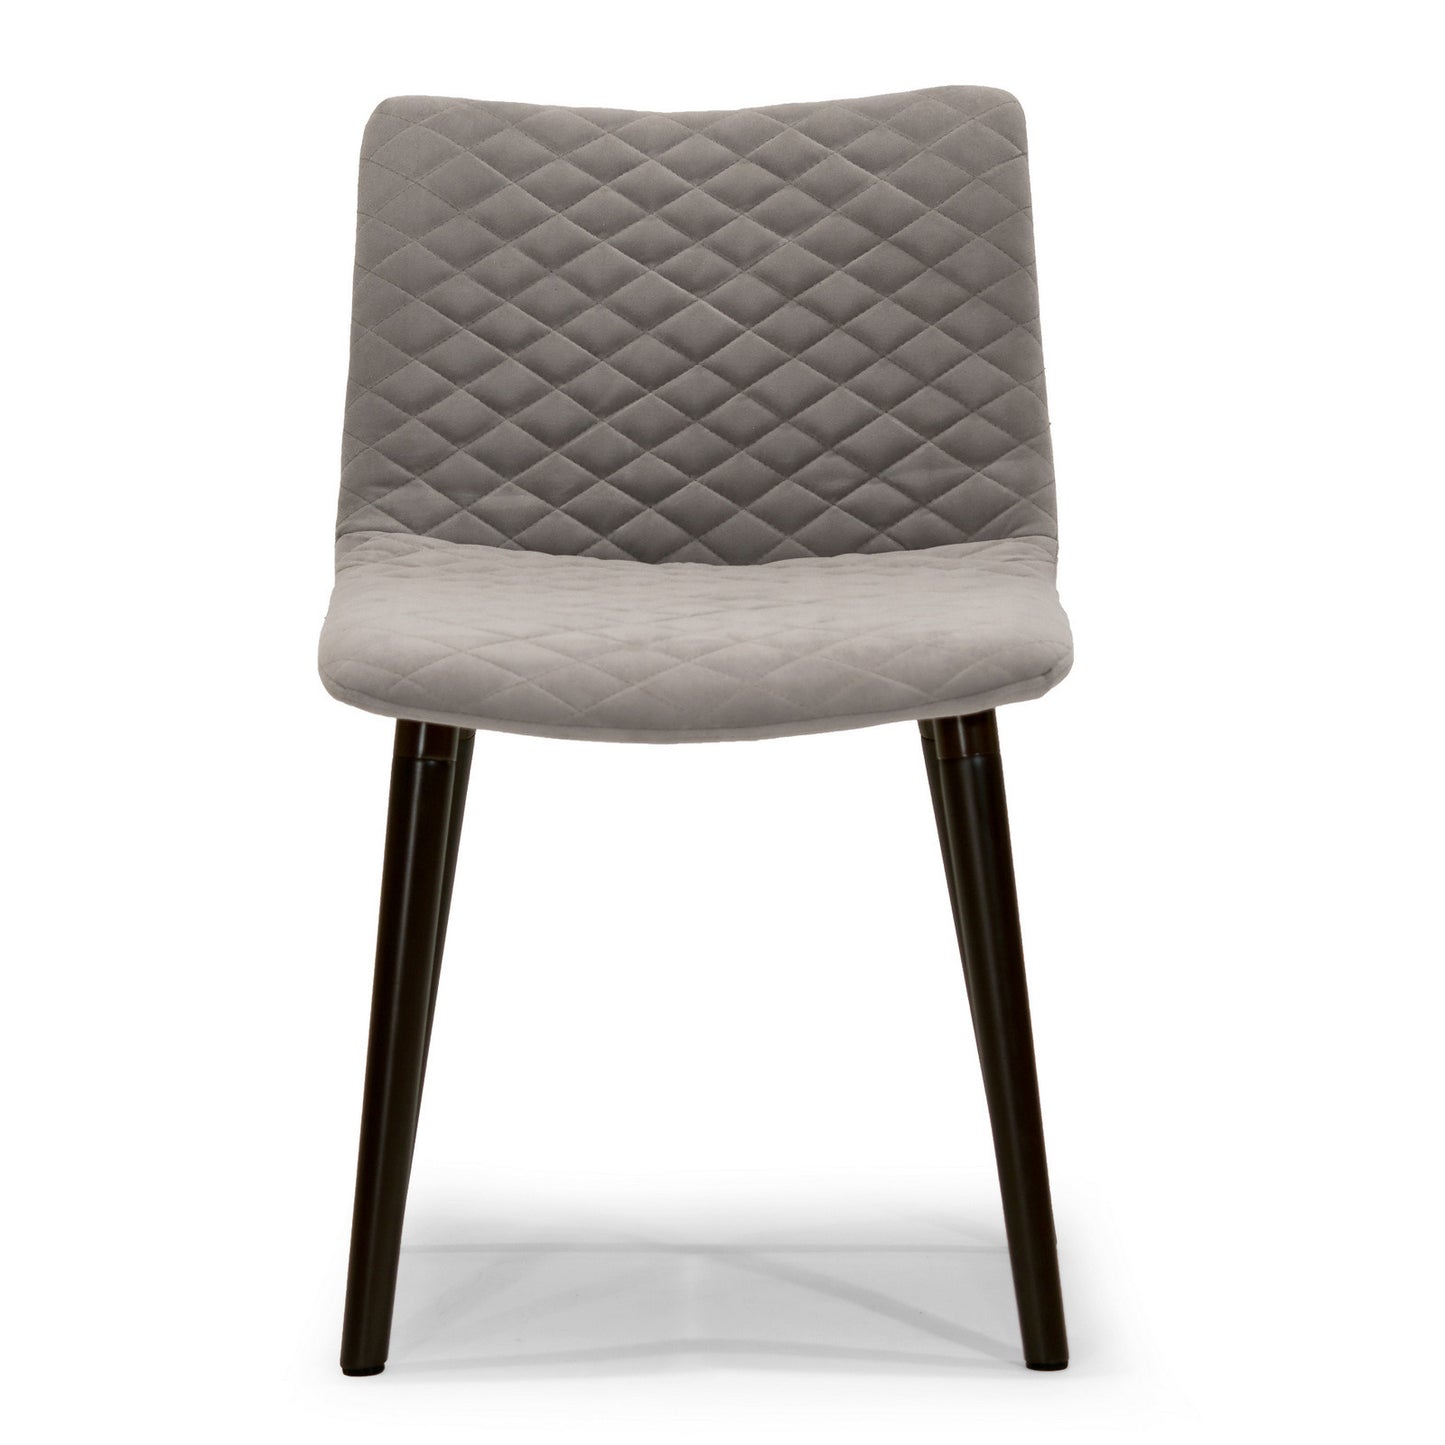 Addison Grey Fabric Dining Chair with Beech Legs (Set of 2)